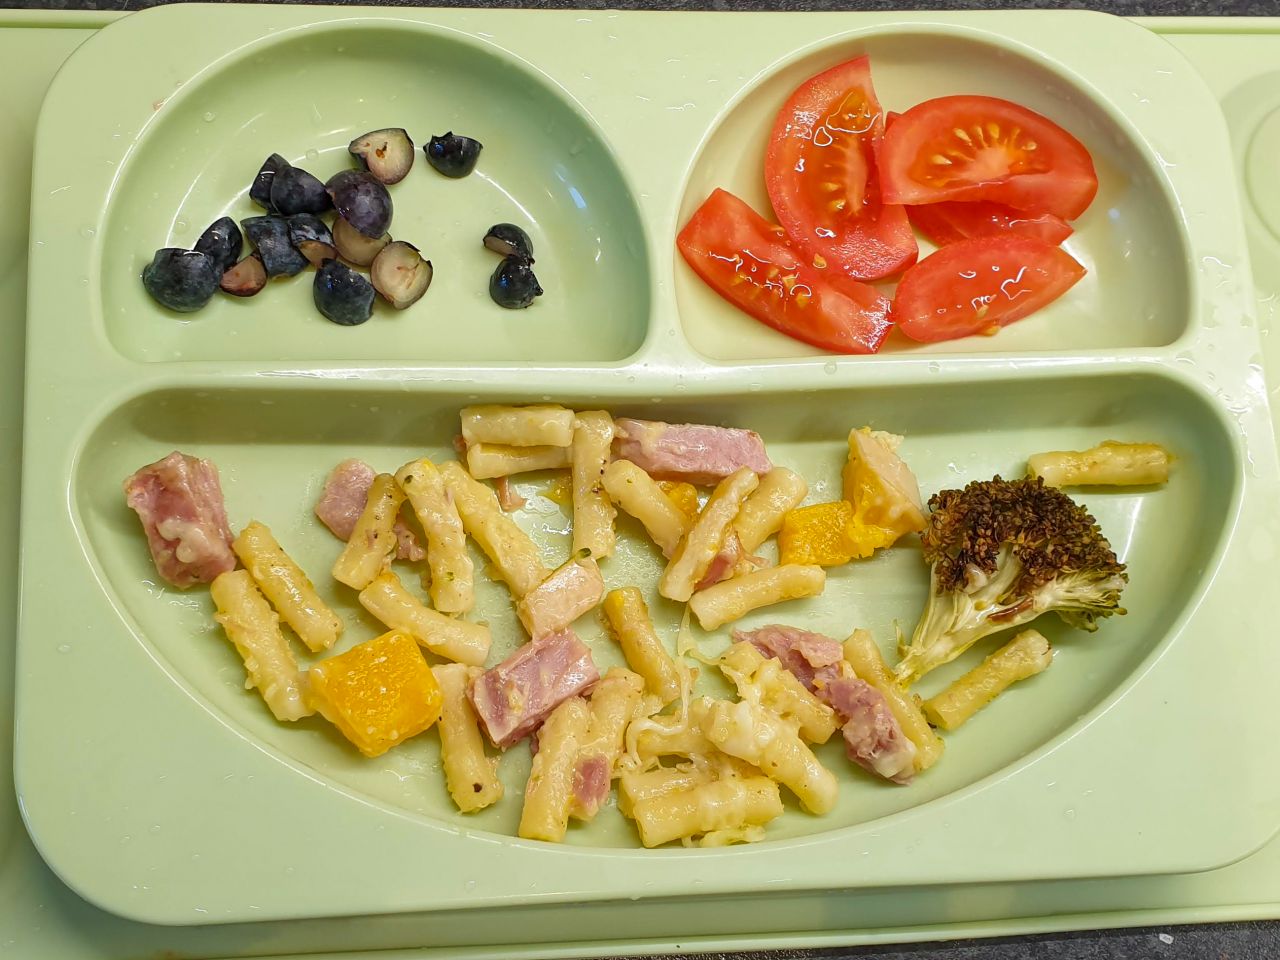 Baby led weaning meal - ham & macaroni cheese, tomatoes & blueberries